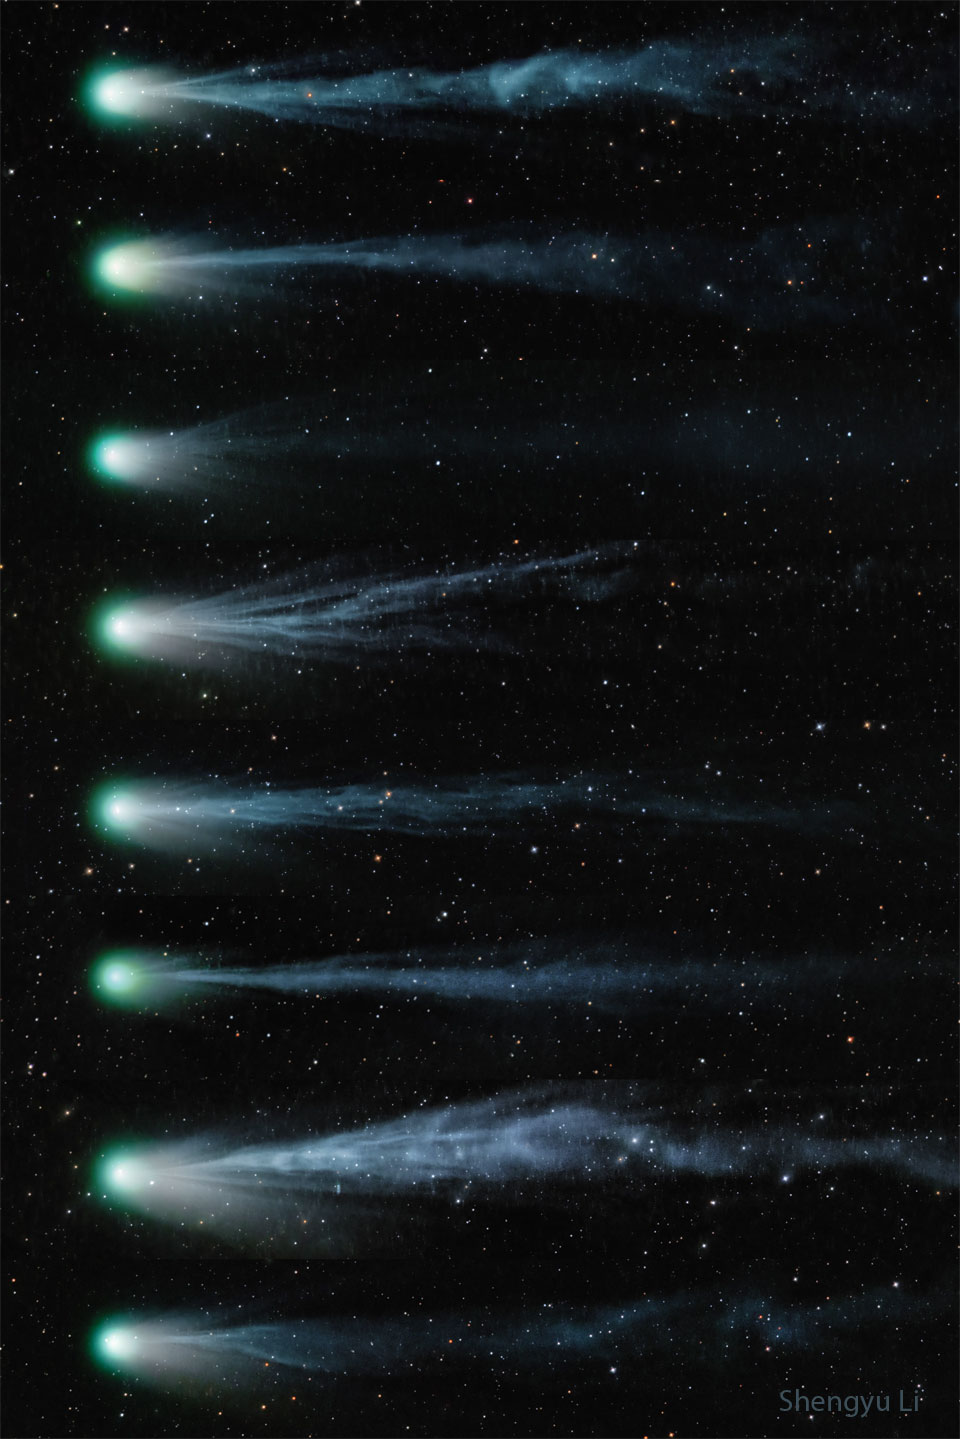 A sequence of eight images of Comet Pons-Brooks, from top
to bottom, showing the comet and its changing tail over
9 days. The ion tail looks very different in each of the
images, sometimes being much more complex than other times.
Więcej szczegółowych informacji w opisie poniżej.